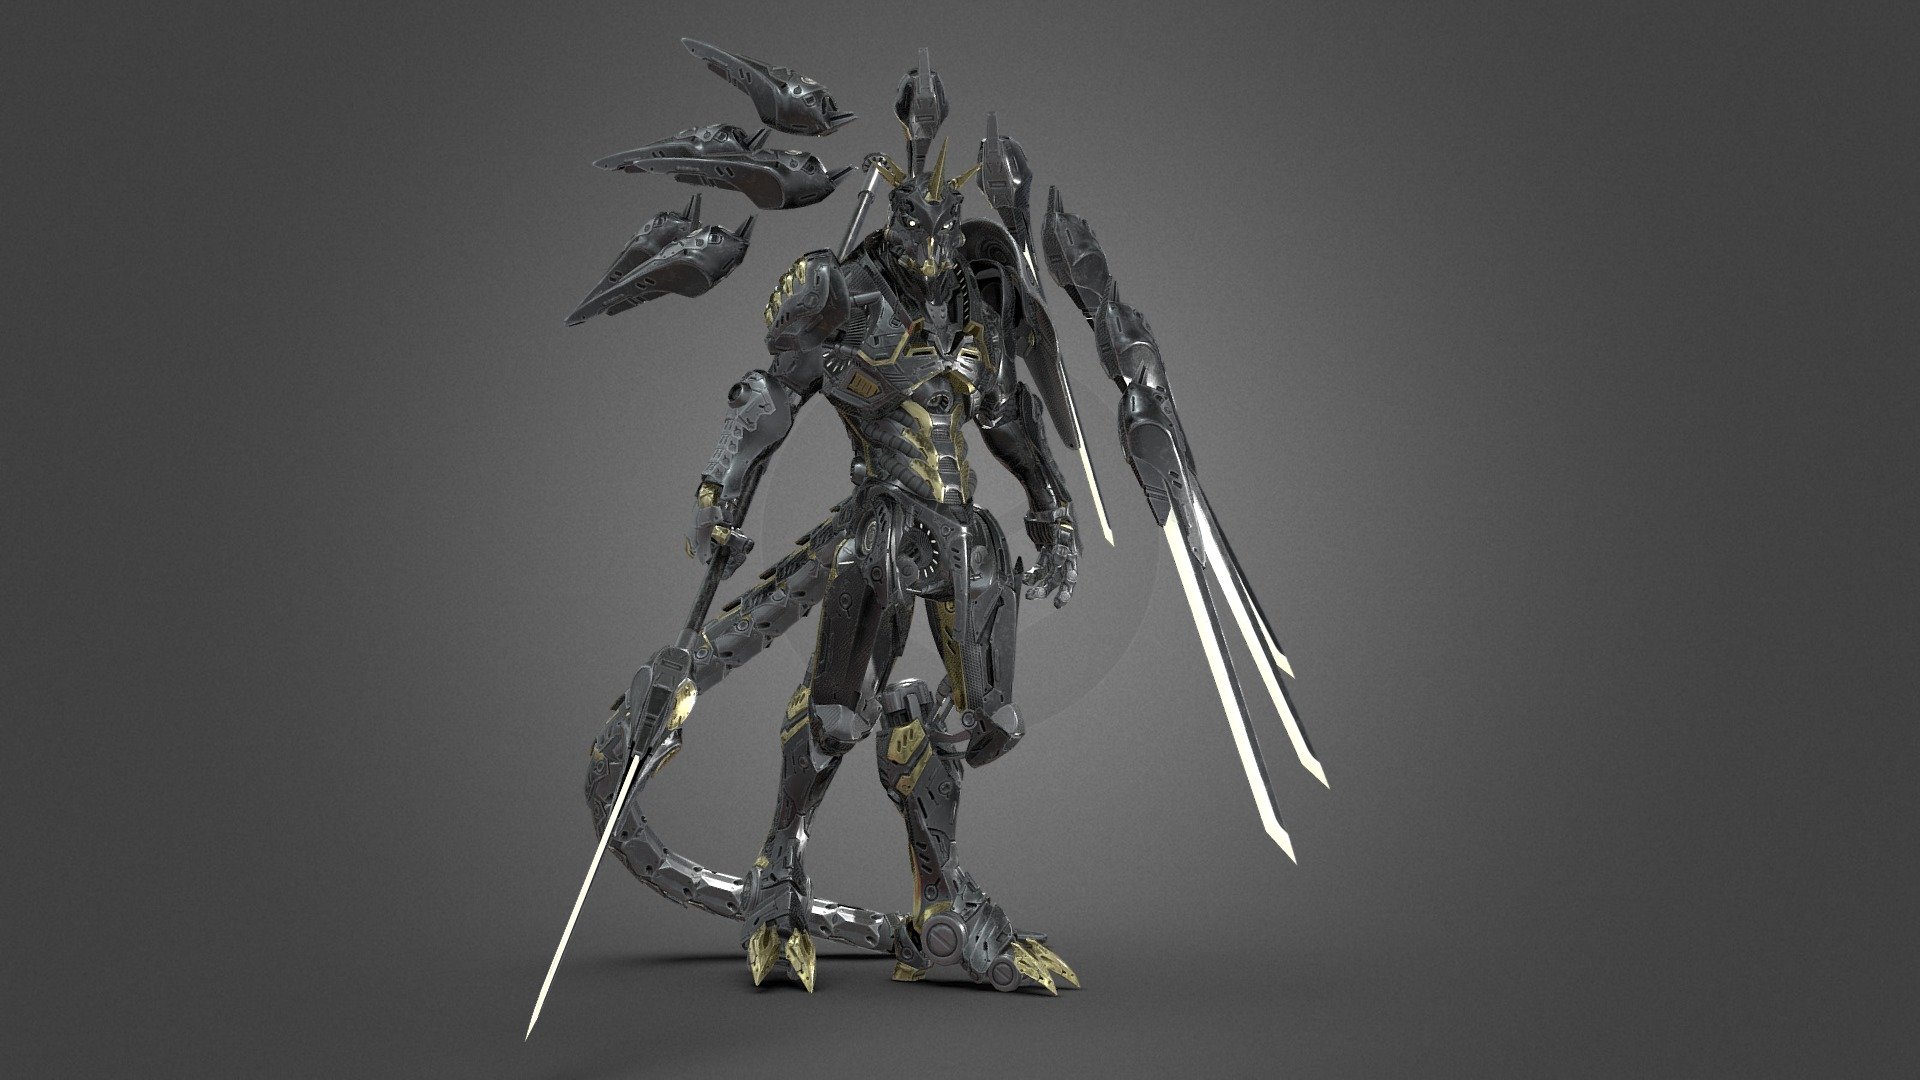 This work is an original art licensed under CC BY-NC 4.0

Original concept ALL RIGHTS RESERVED

Hi everyone! Here my latest work: Skywrath (provisional name), a robot I designed. . Entirely sculpted in Zbrush, retopologized and rigged in Maya, textured with Substance 3D Painter with some modifies in Photoshop.

Hope you like it! - Skywrath - 3D model by Filippo Ferrarini (@FilippoFerrarini) 3d model